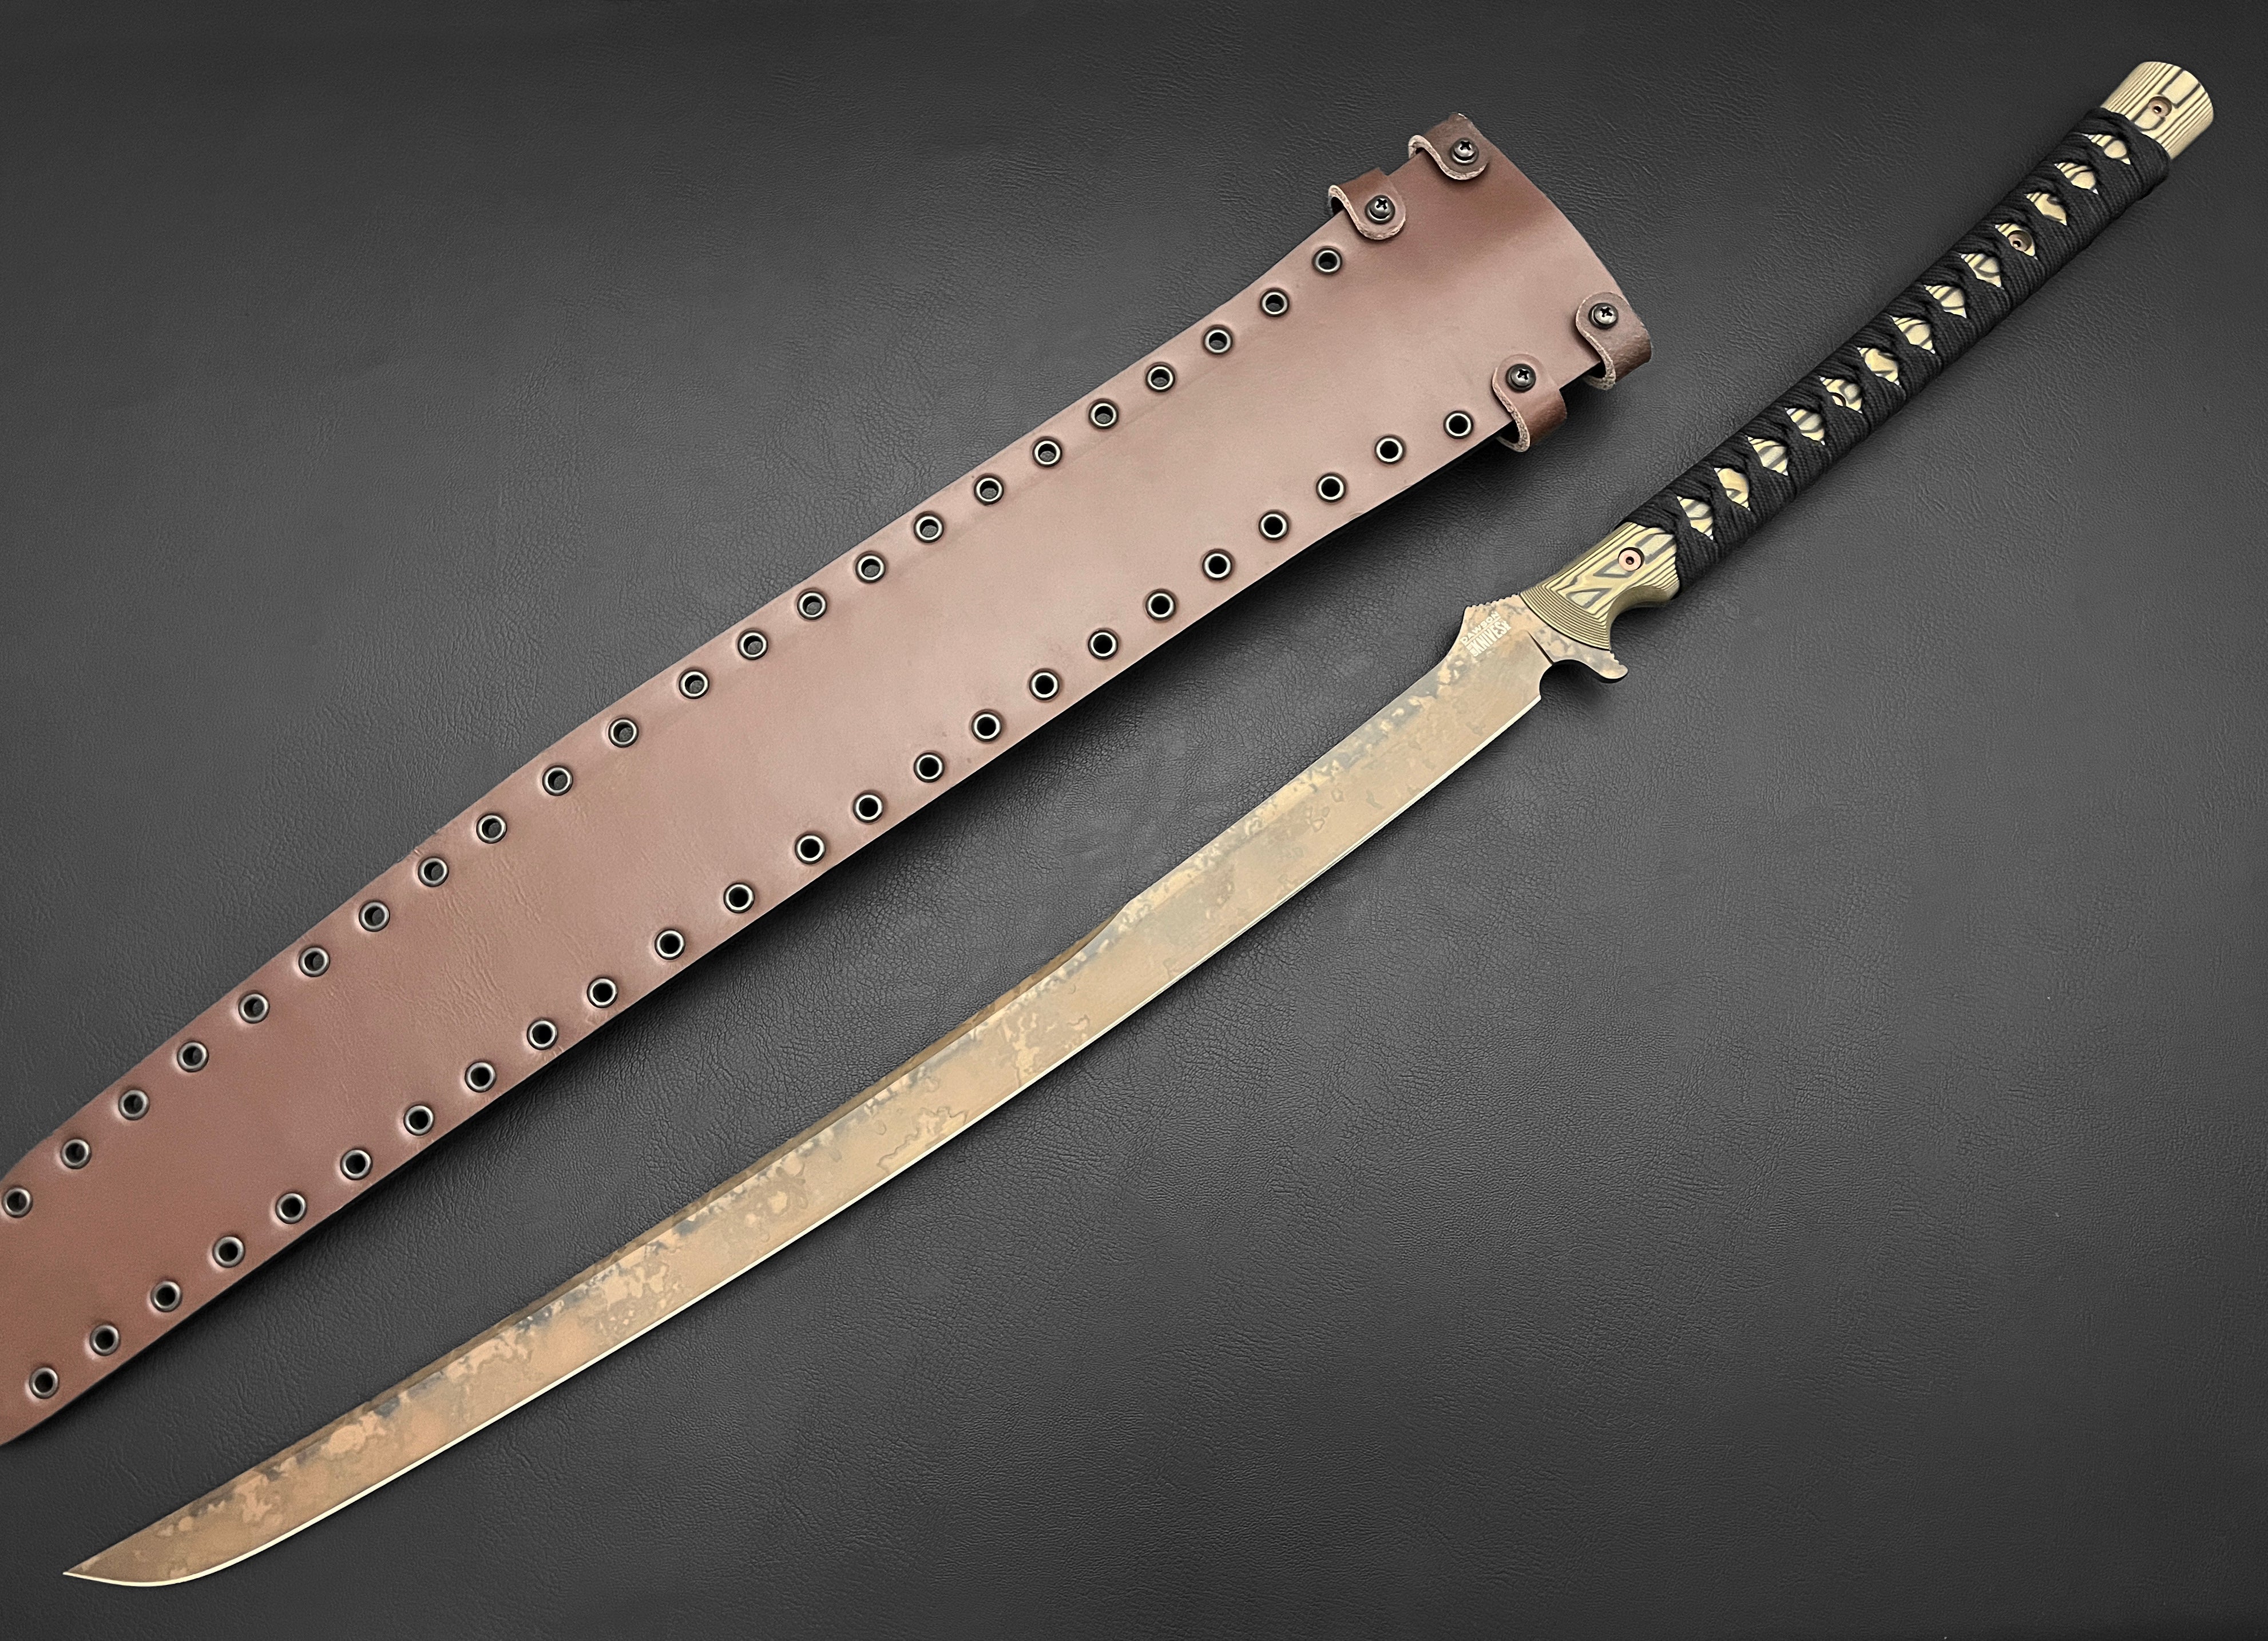 Relentless Sword 23" | CPM MagnaCut | NEW Scorched Earth Finish